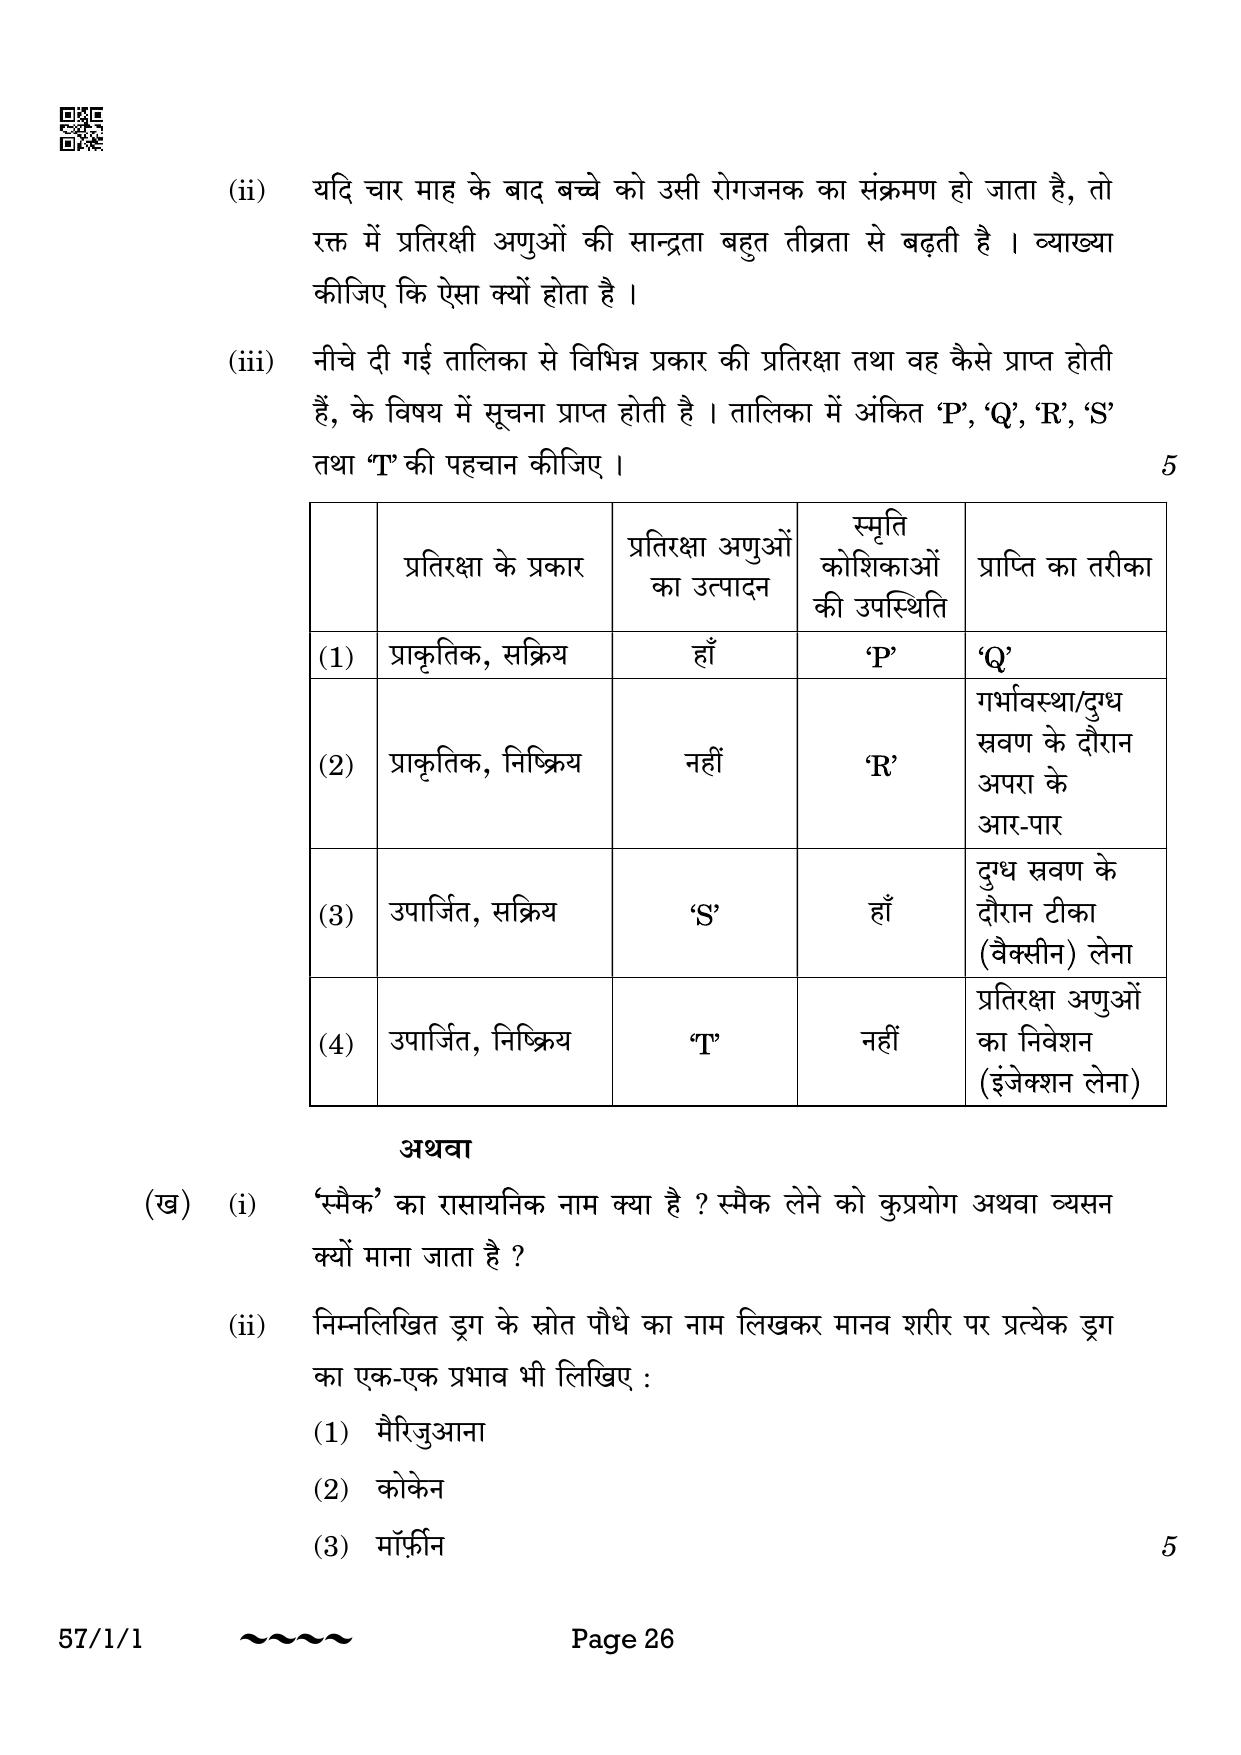 CBSE Class 12 57-1-1 Biology 2023 Question Paper - Page 26